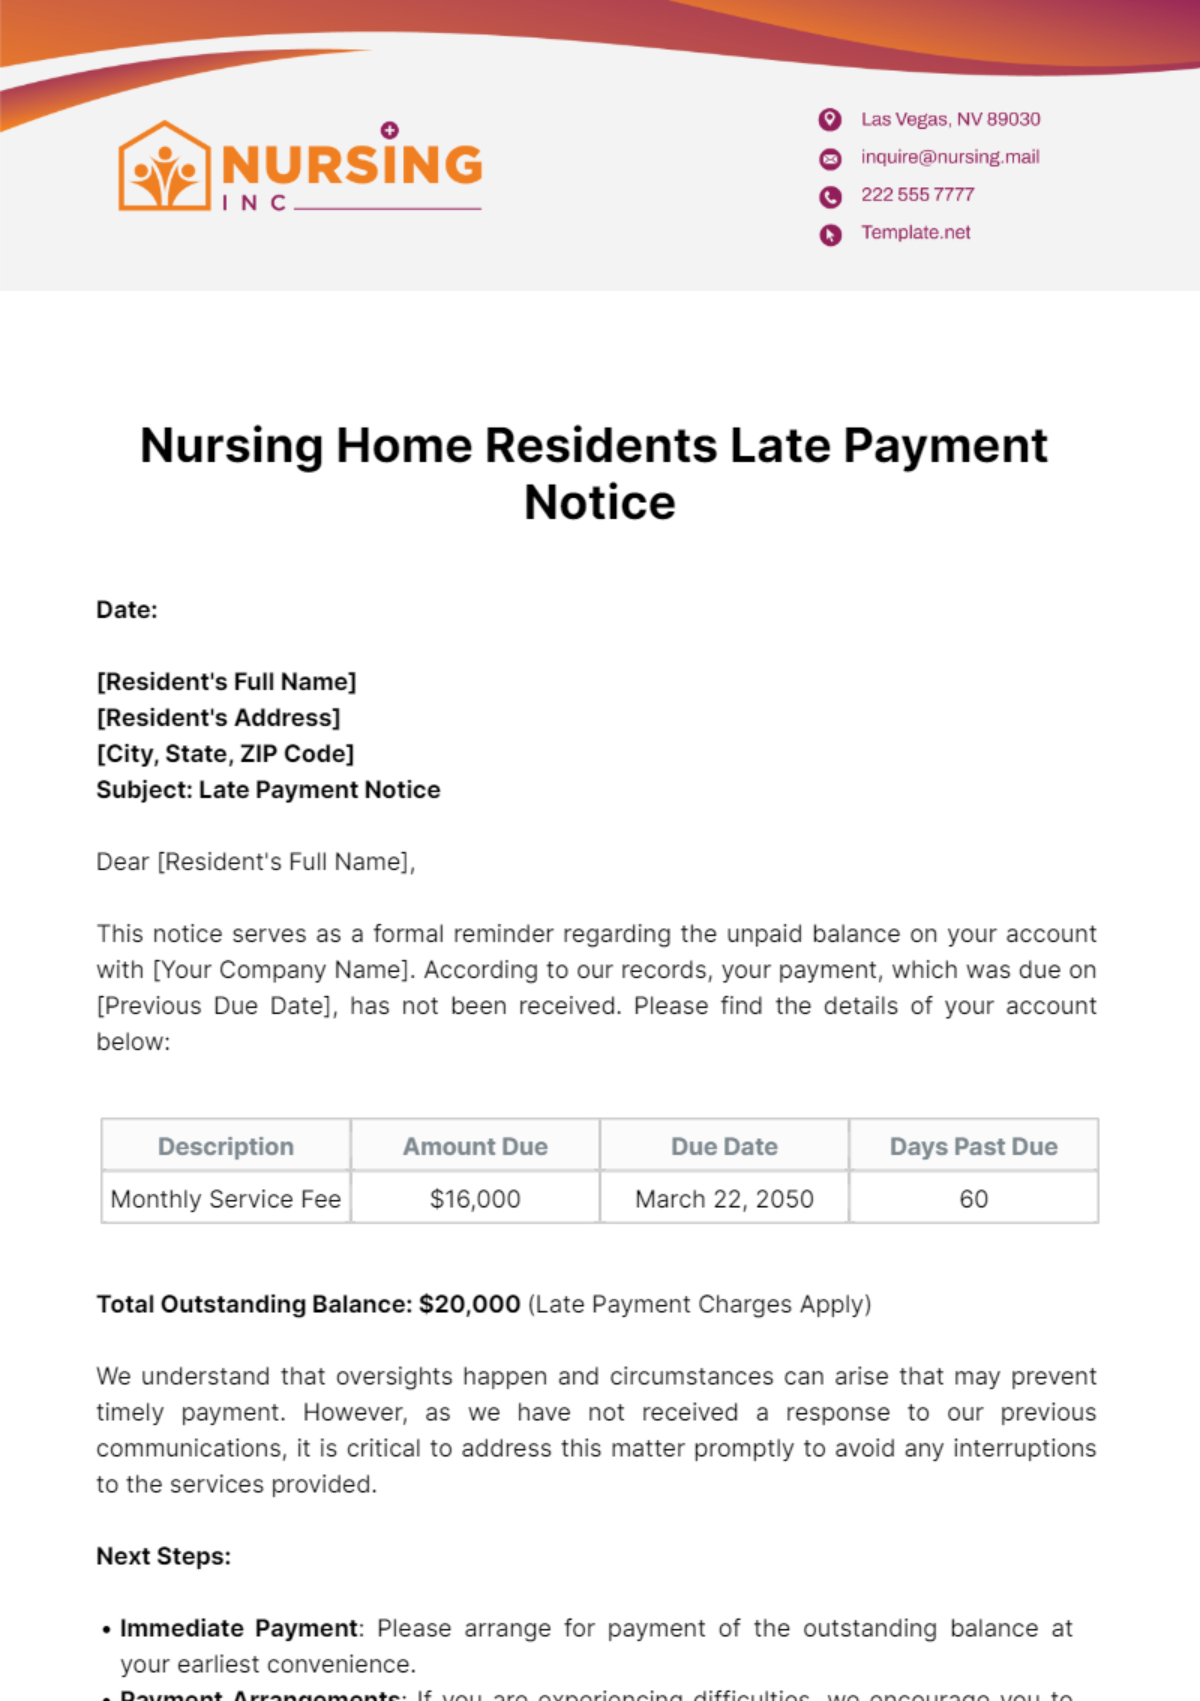 Nursing Home Residents Late Payment Notice Template